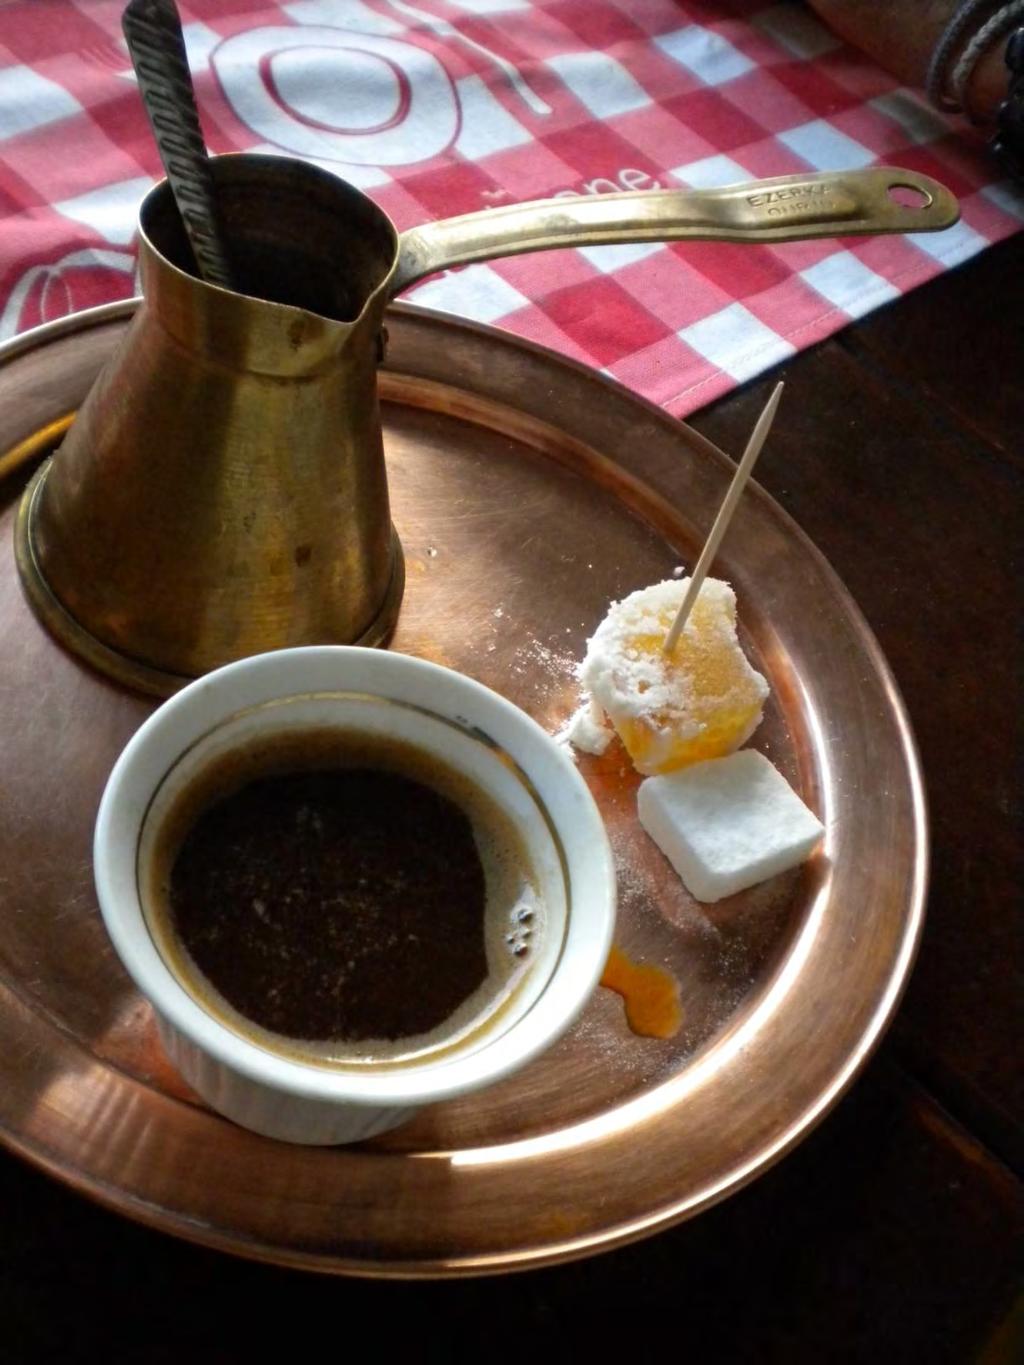 Coffee s history in Turkey began in the 16 th century and is traditionally made by boiling